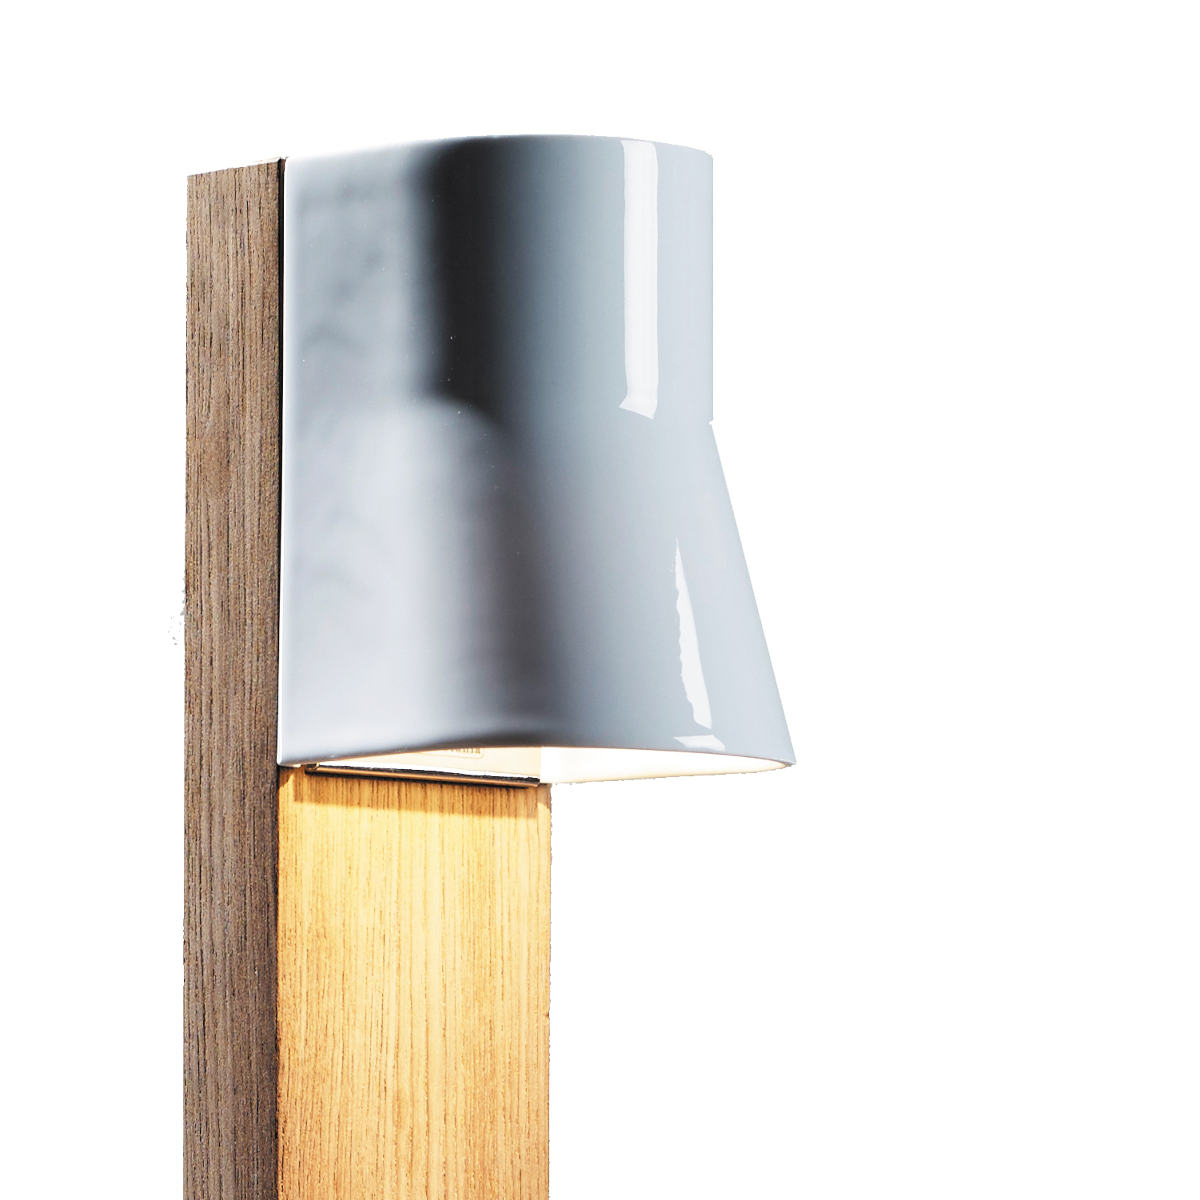 Path light BEACON made of porcelain and teak wood